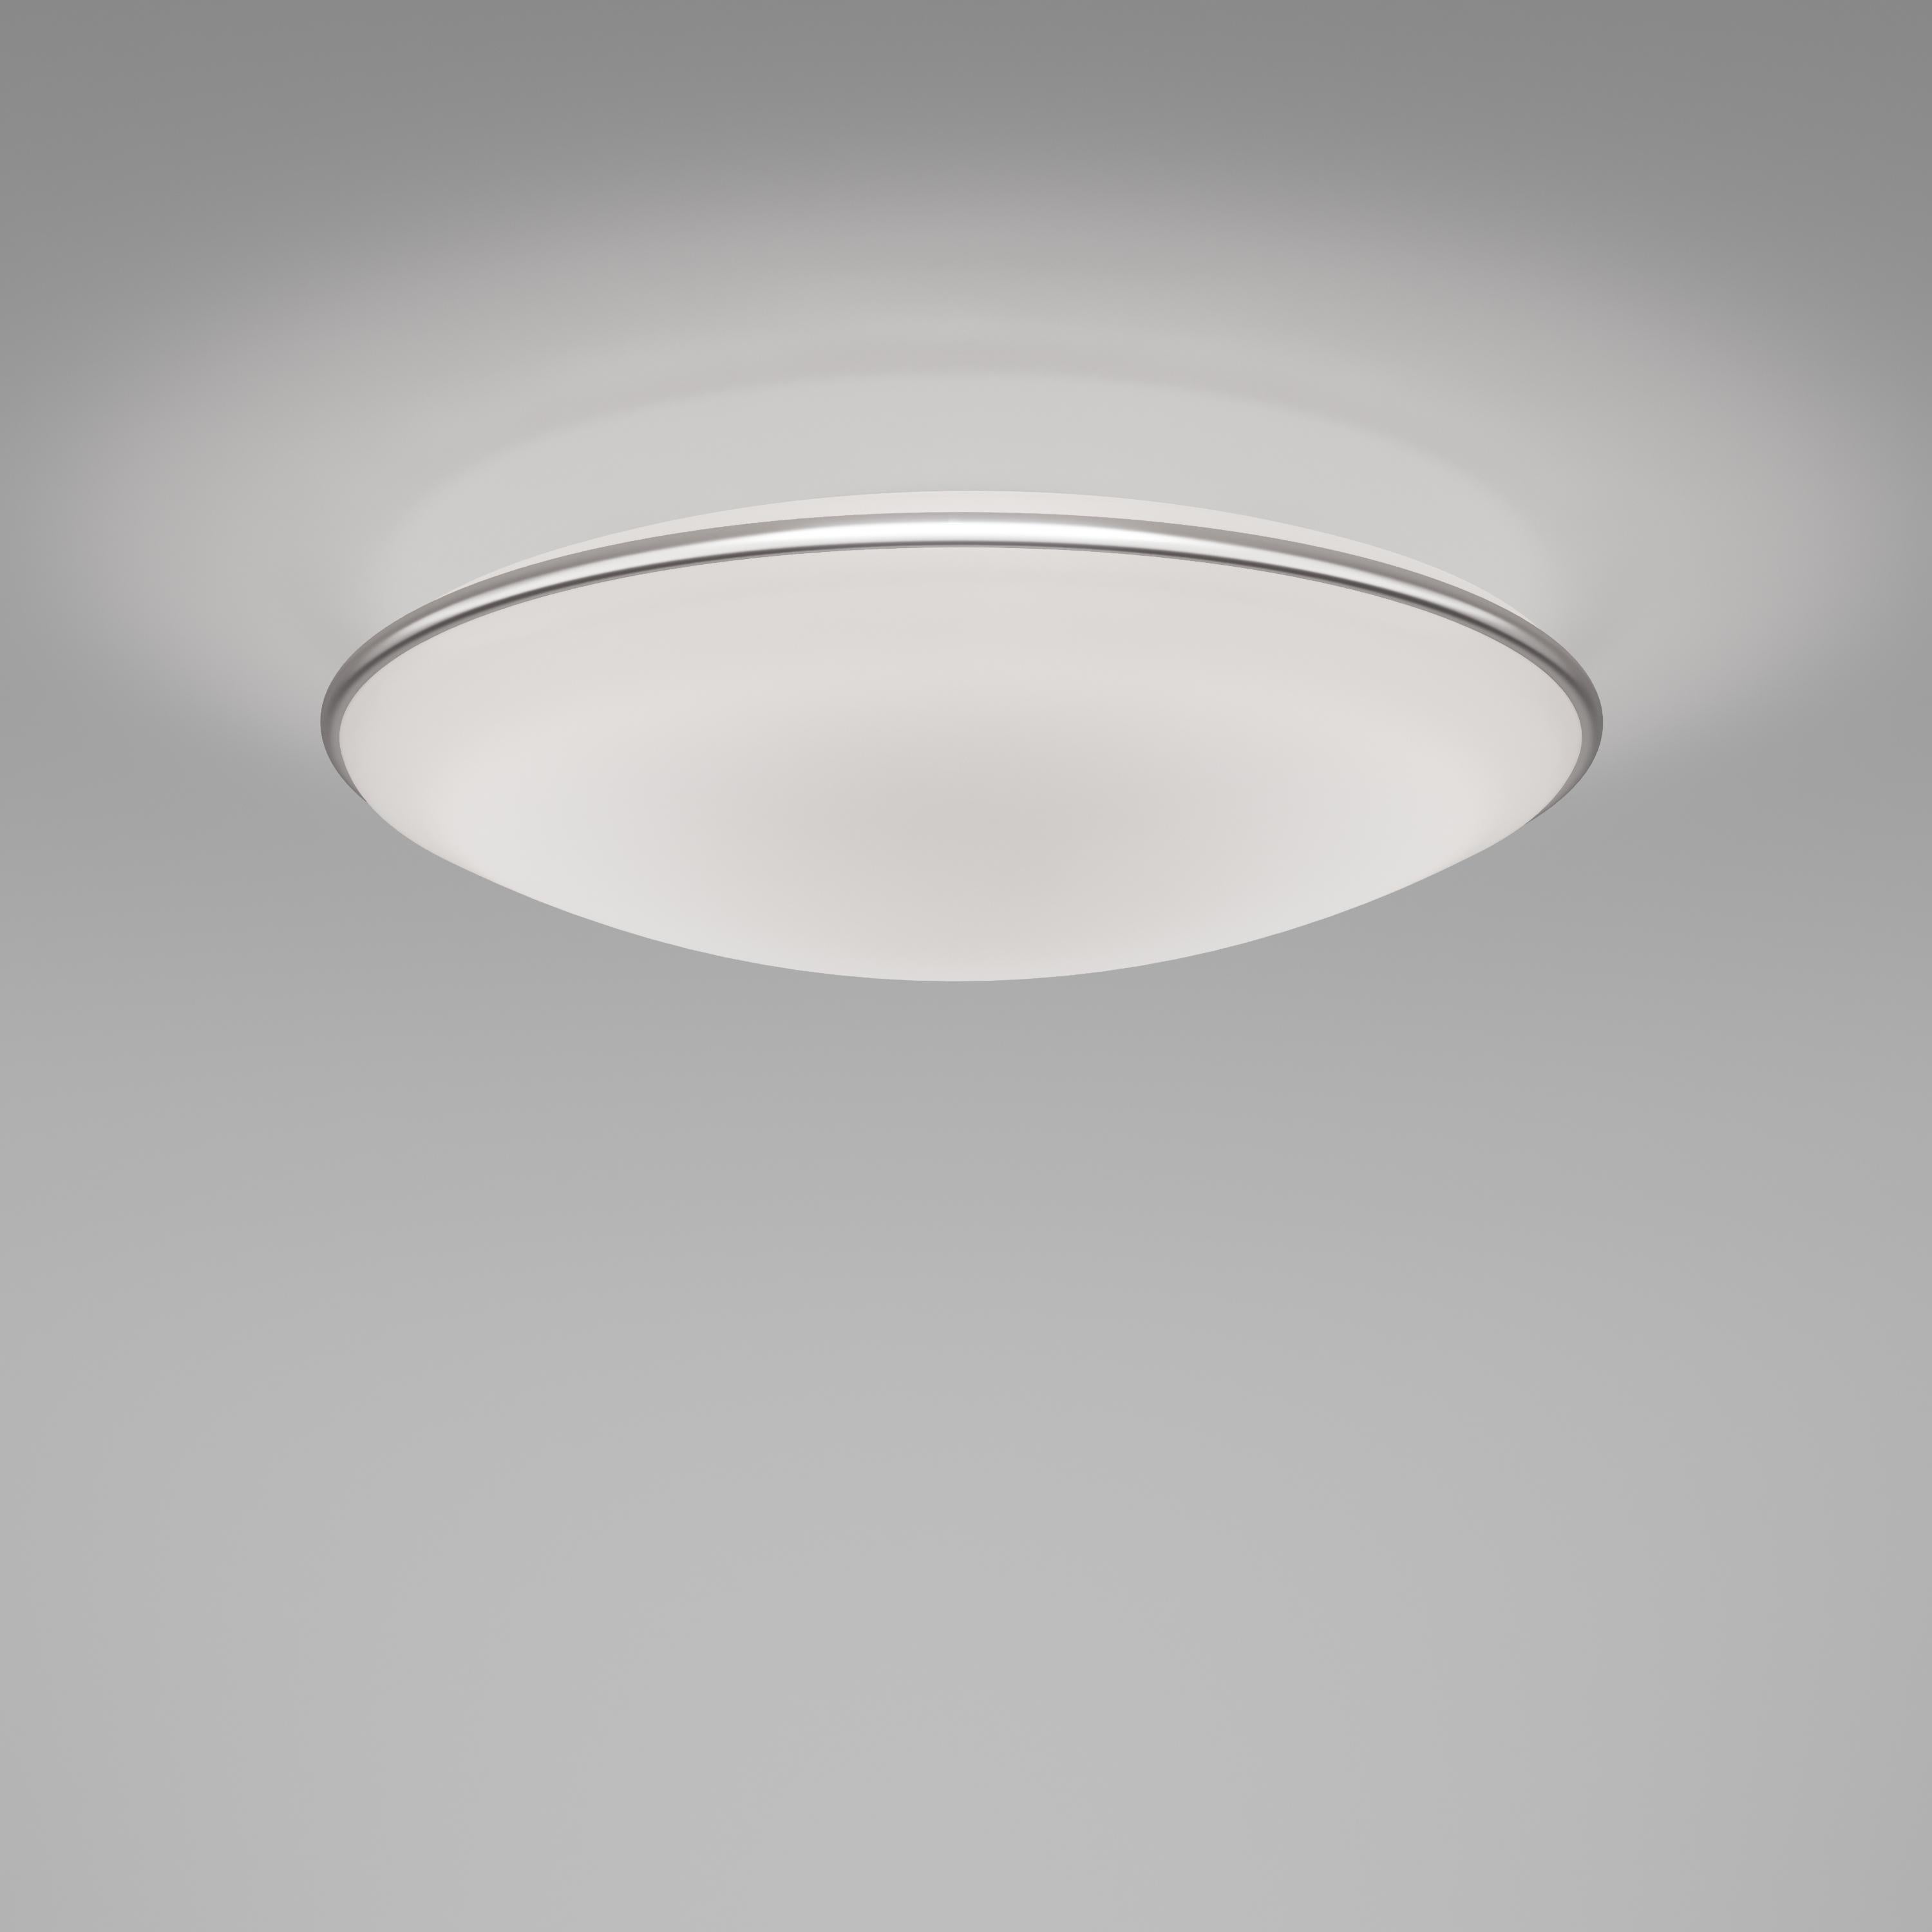 A model with a lenticular shape, available in the ceiling or wall lamp versions. In three different sizes, it is made of satin-white glass, with the characteristic morrisa decoration.

Specifications:
Material: Glass, metal
Light source: E26
No of